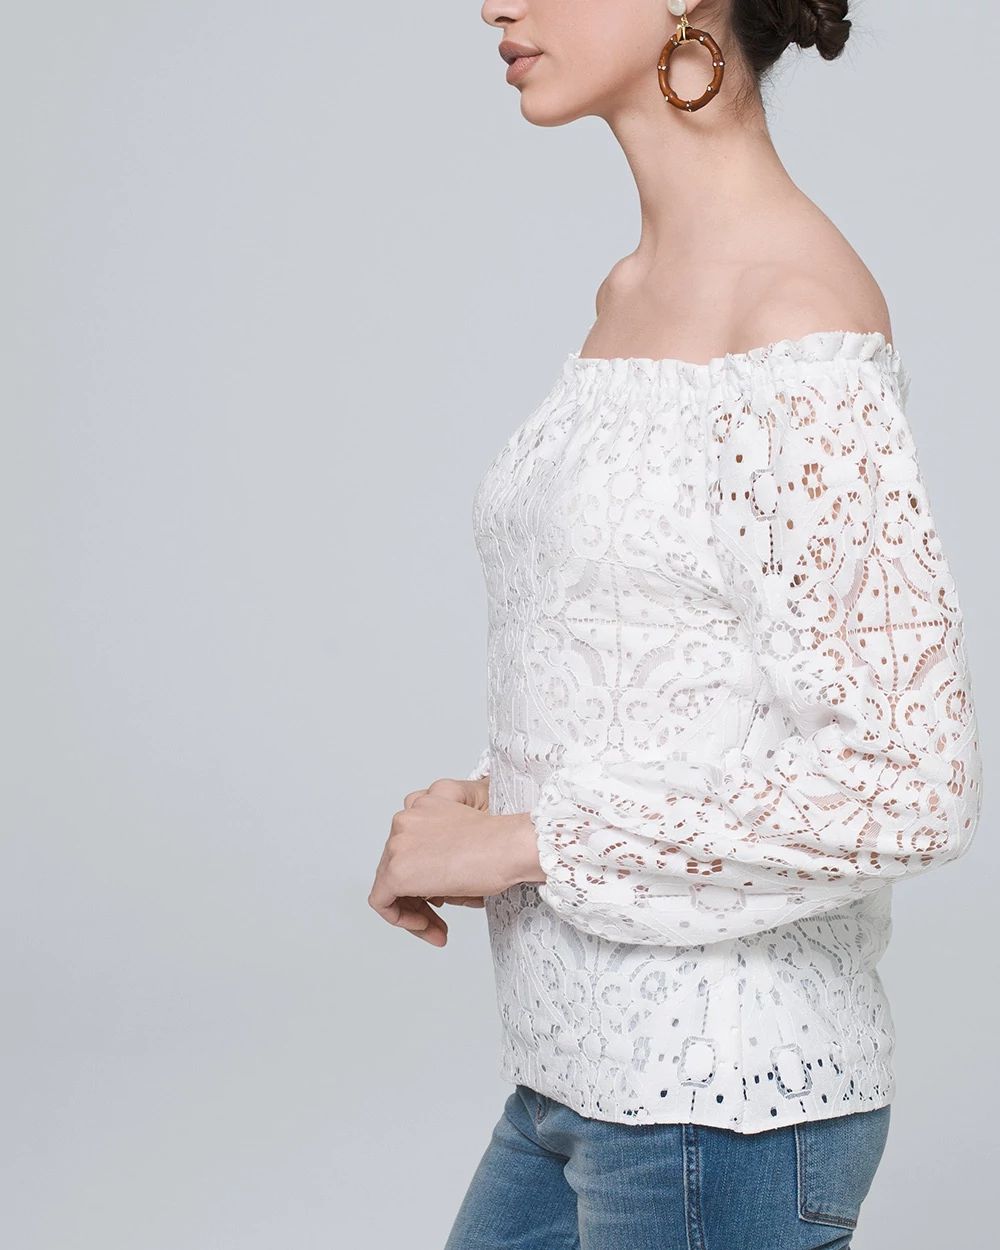 Off-the-Shoulder Lace Blouse click to view larger image.